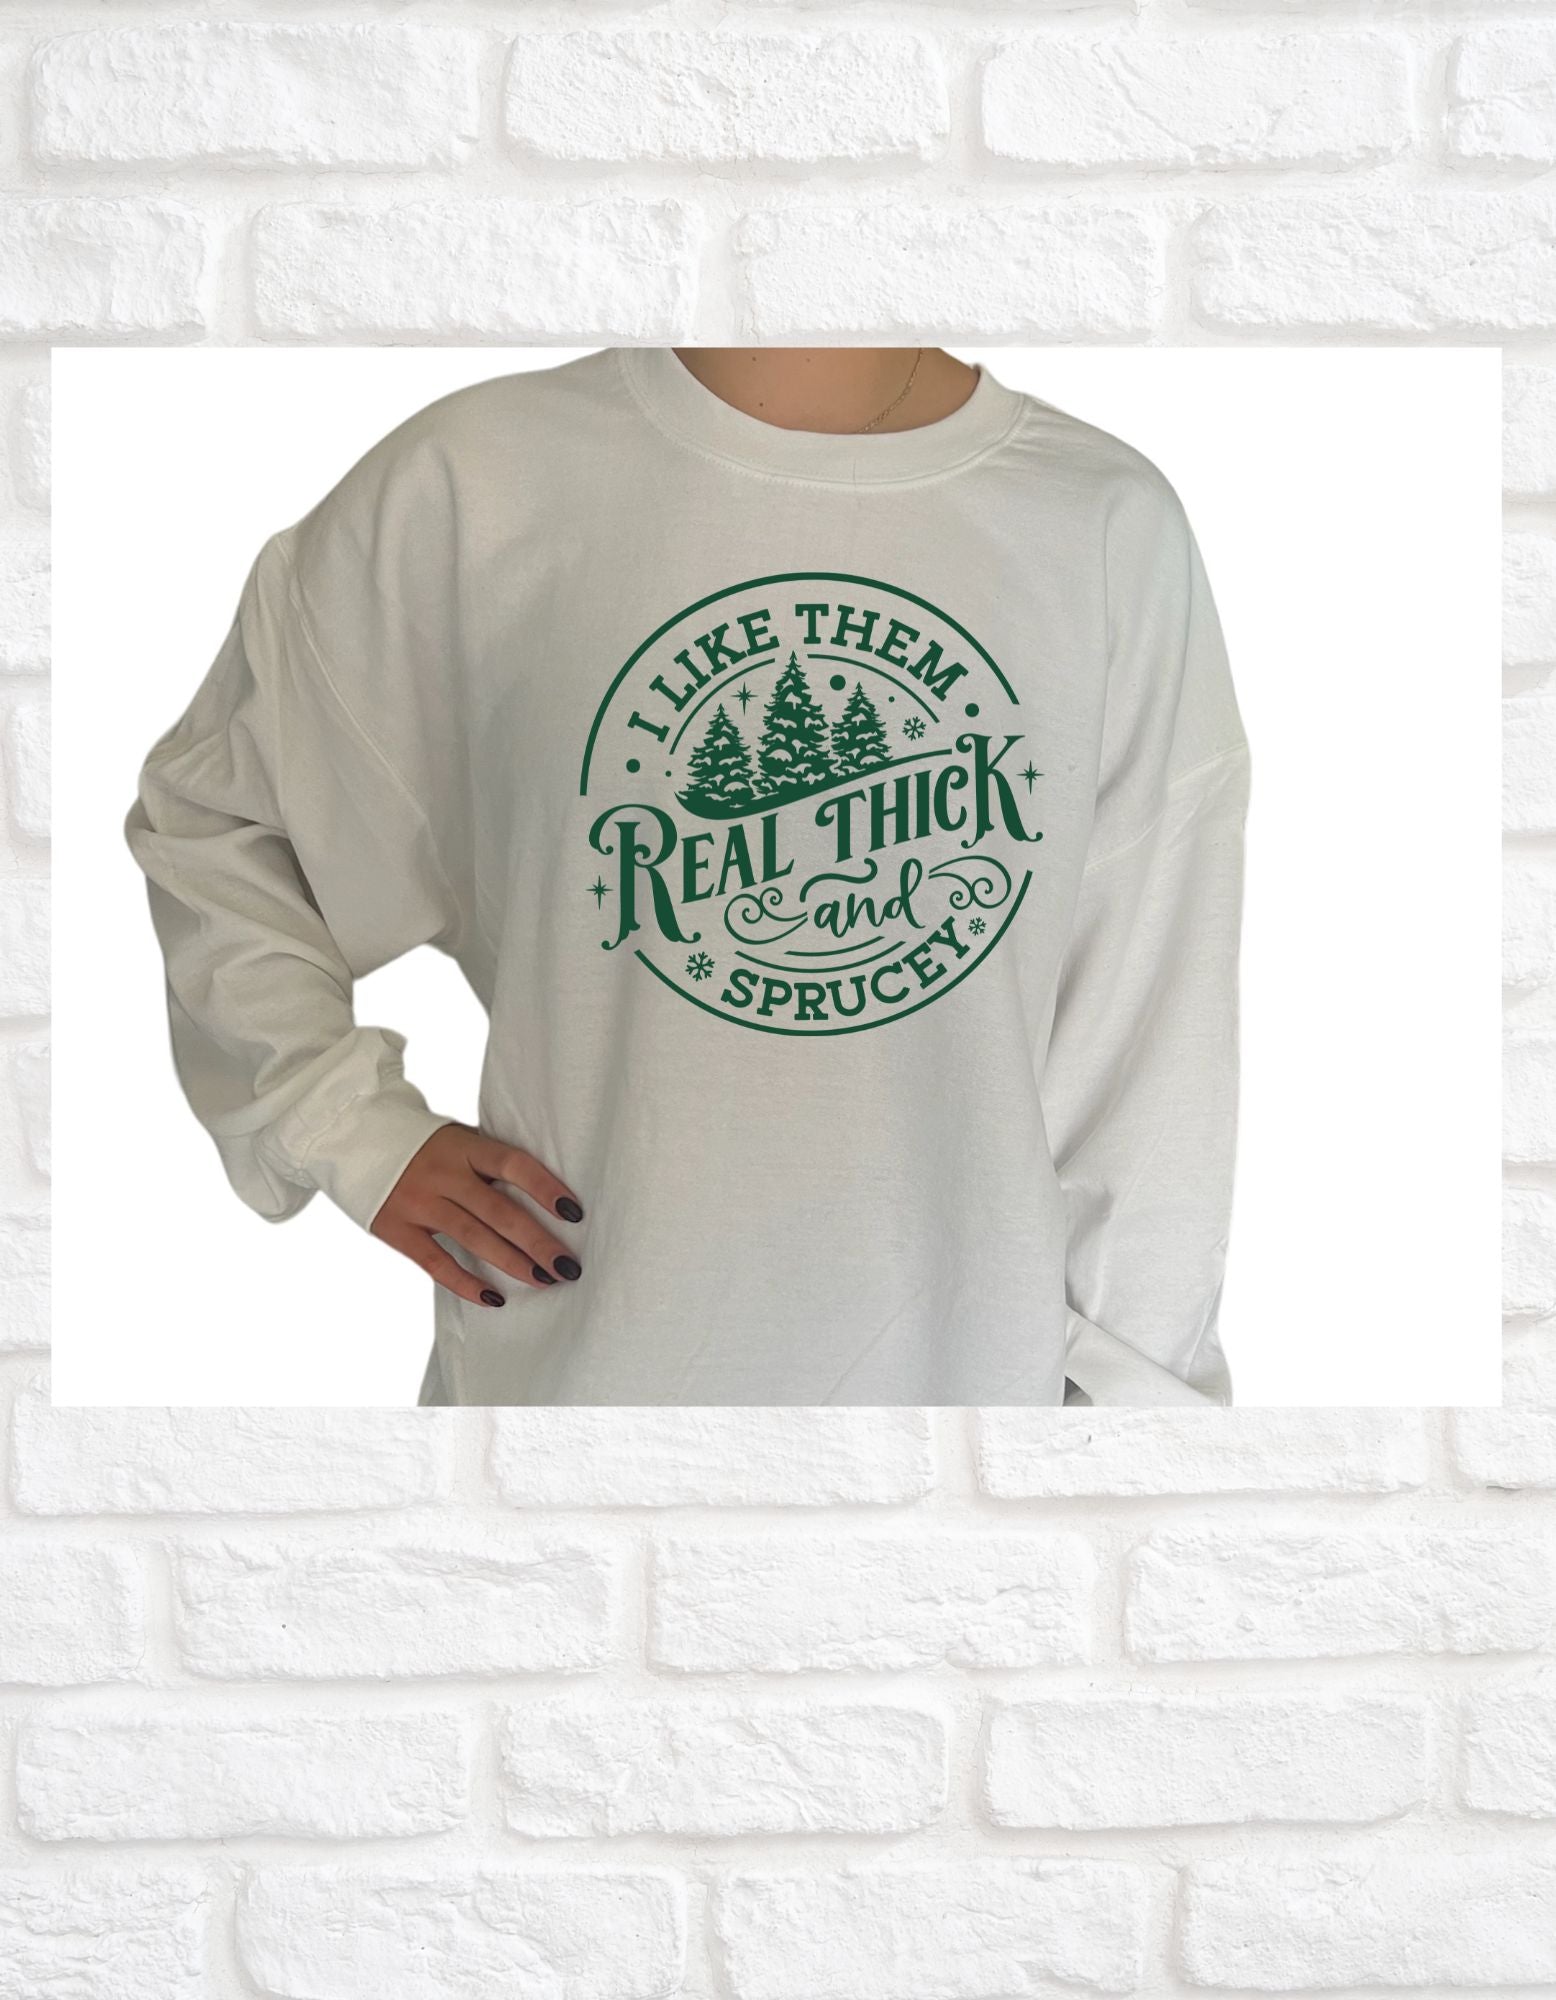 Real Thick And Sprucey Sweatshirt